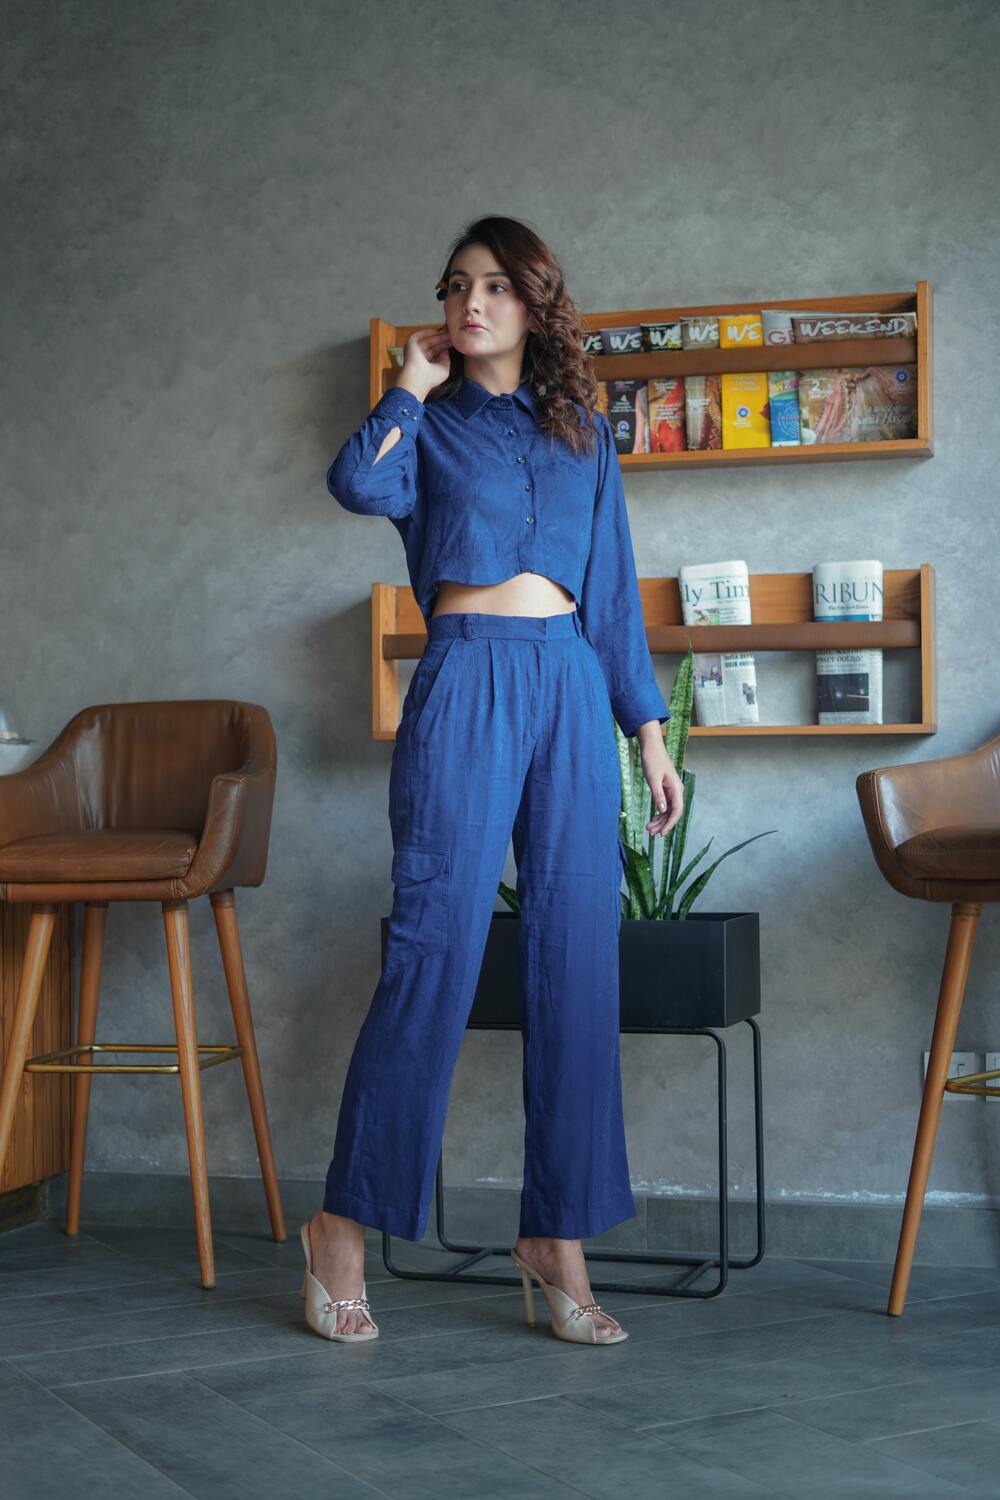 Wide-legged/relaxed pants